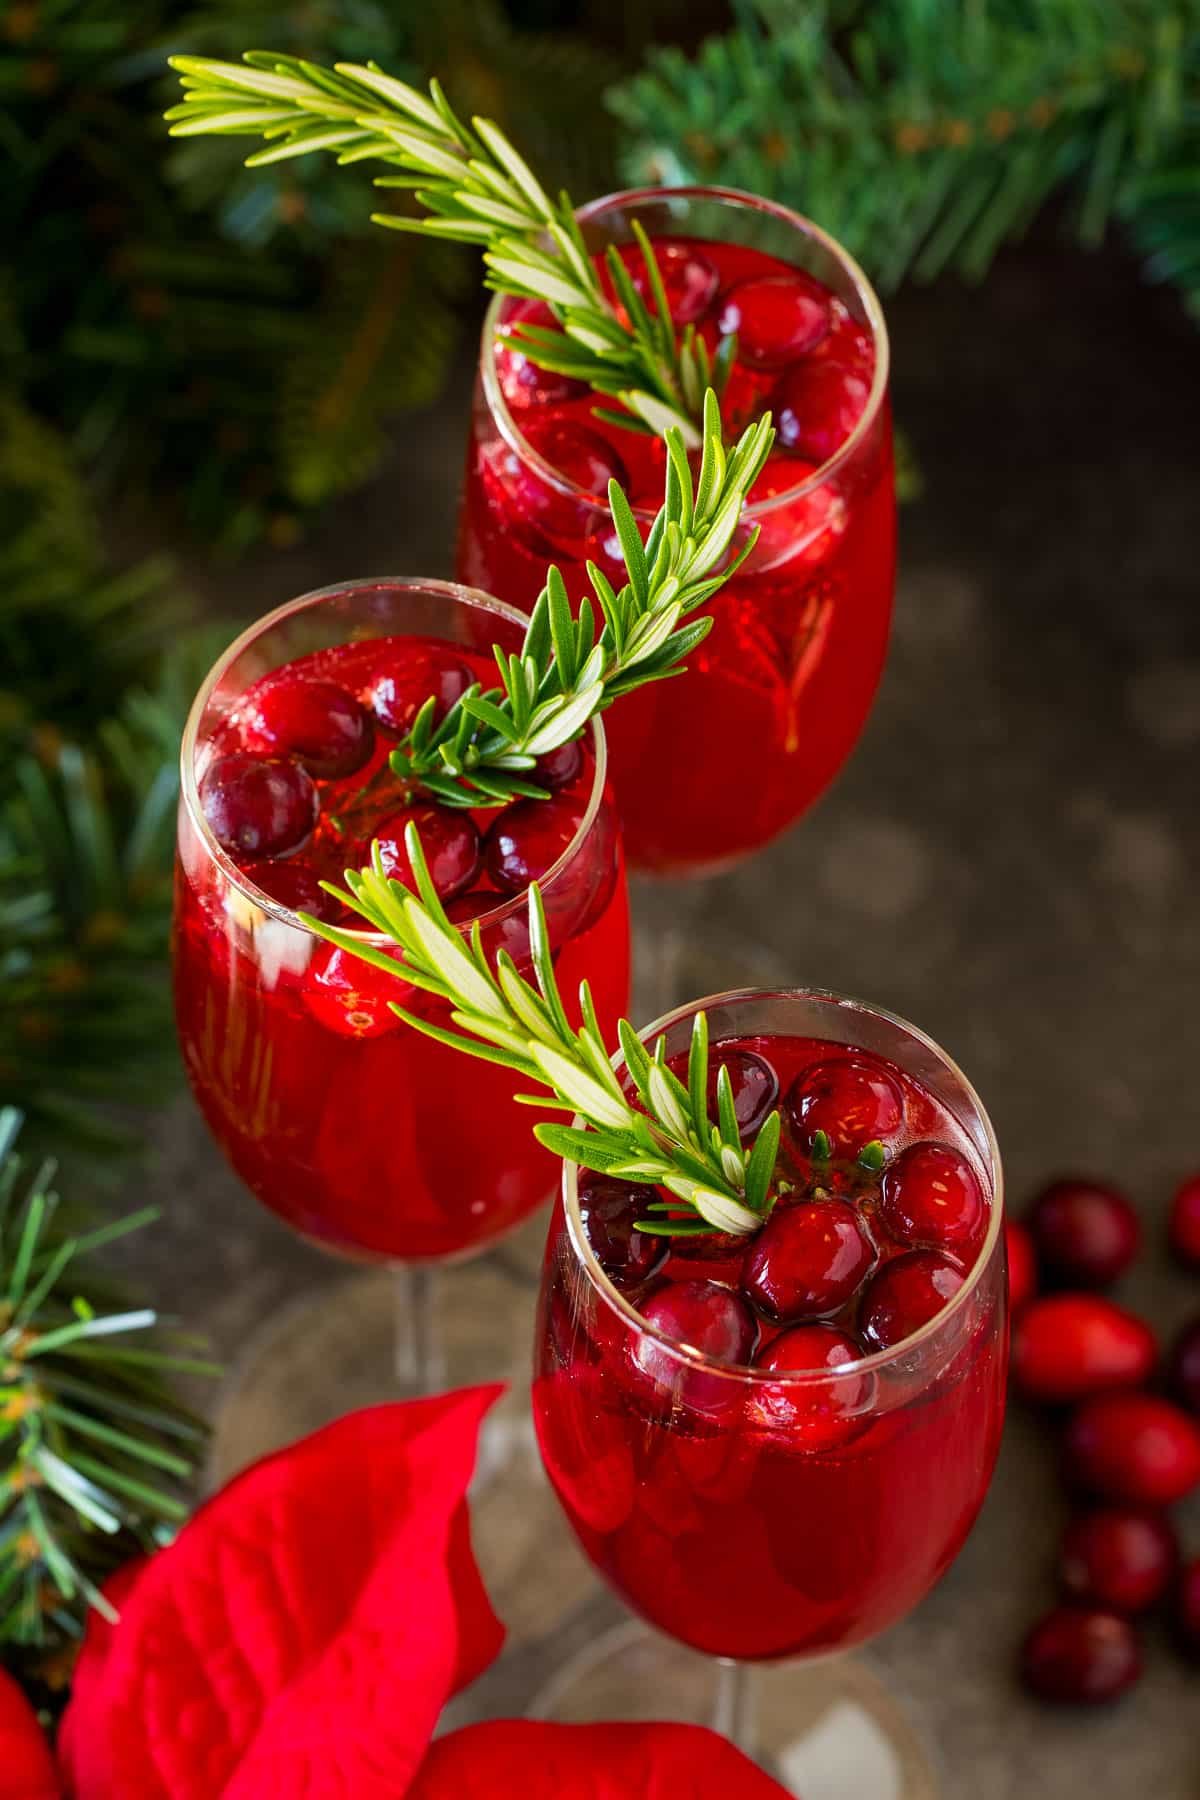 Three glasses of poinsettia cocktail garnished with berries and rosemary.